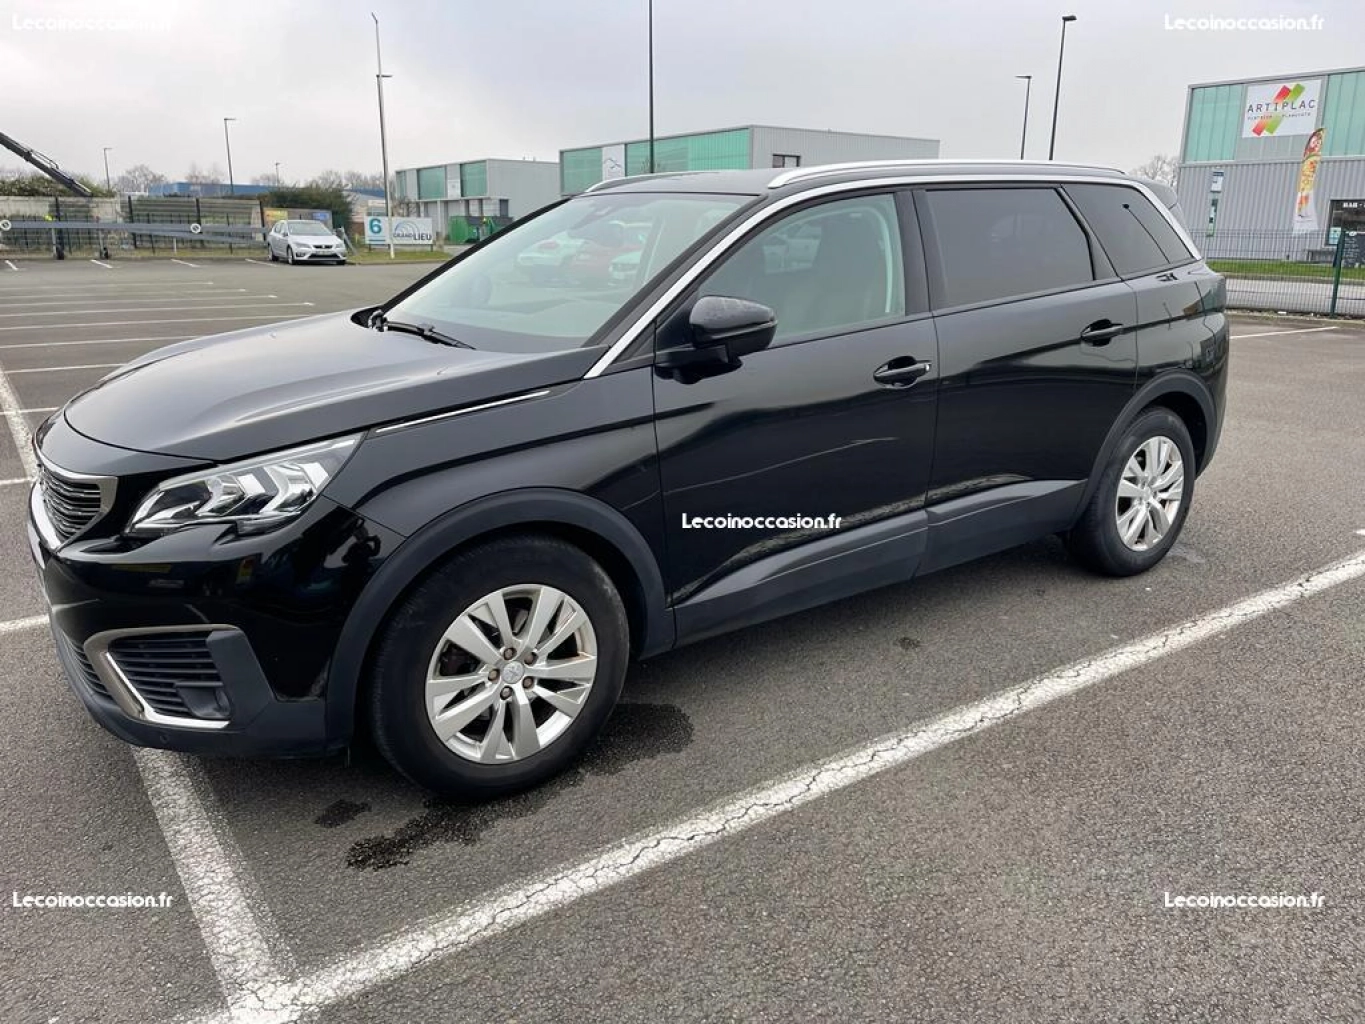 Peugeot 5008 2.0 HDI 150 Active Business